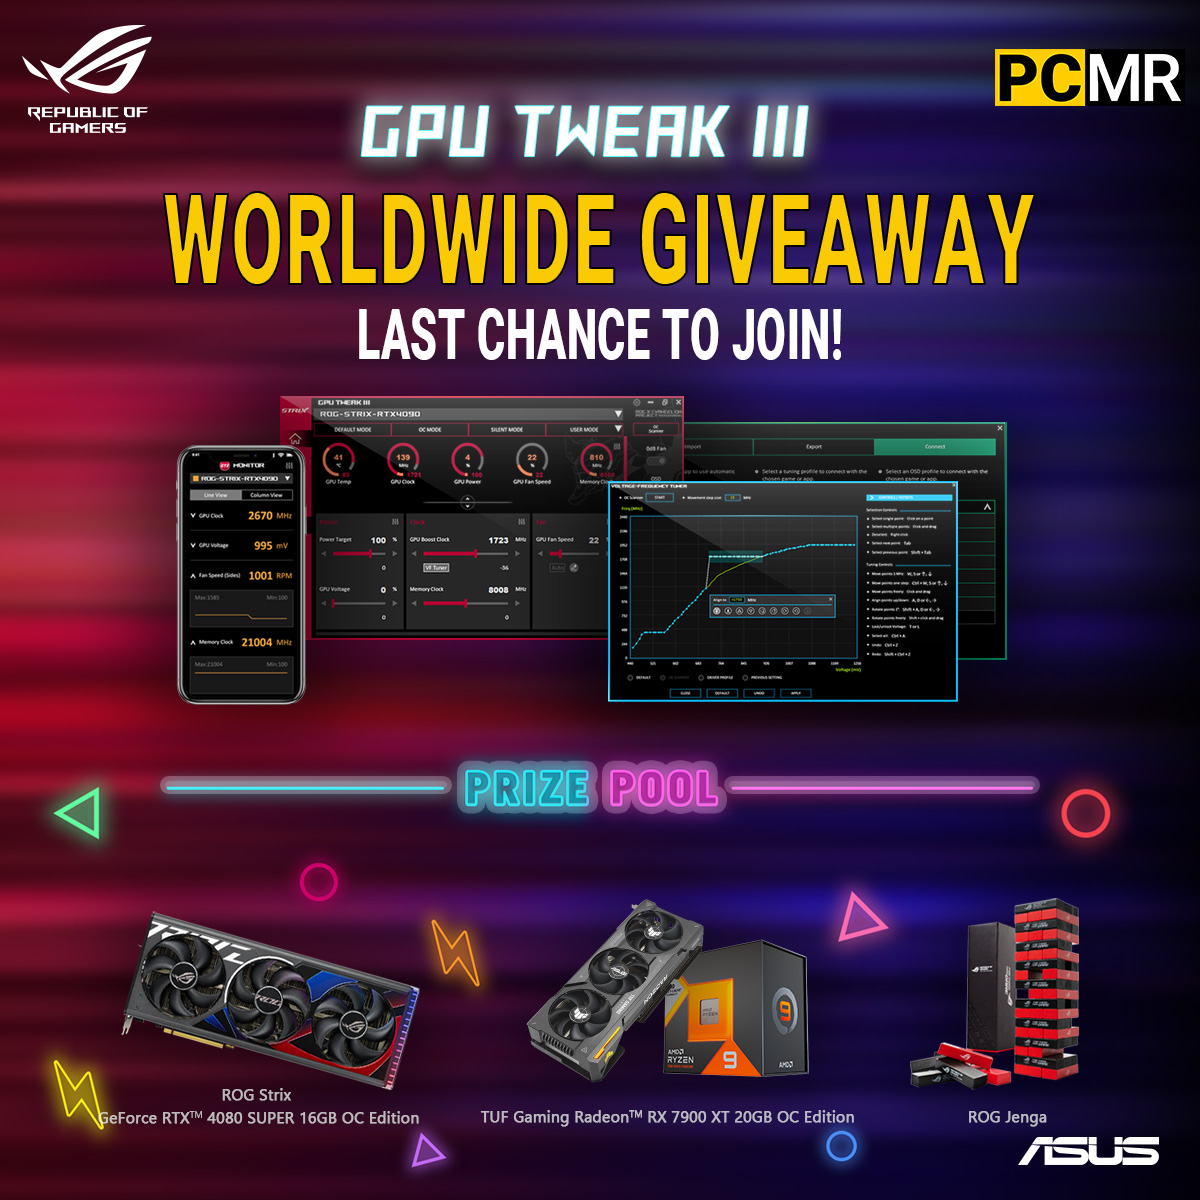 Last chance to join the WORLDWIDE @ASUS_ROG x PCMR Giveaway event! Ends May 13! Week 4 has a focus on the customization of your GPU Tweak III interface! Join in and enter to win a bunch of awesome ASUS hardware and more goodies! Enter now: reddit.com/r/pcmasterrace…